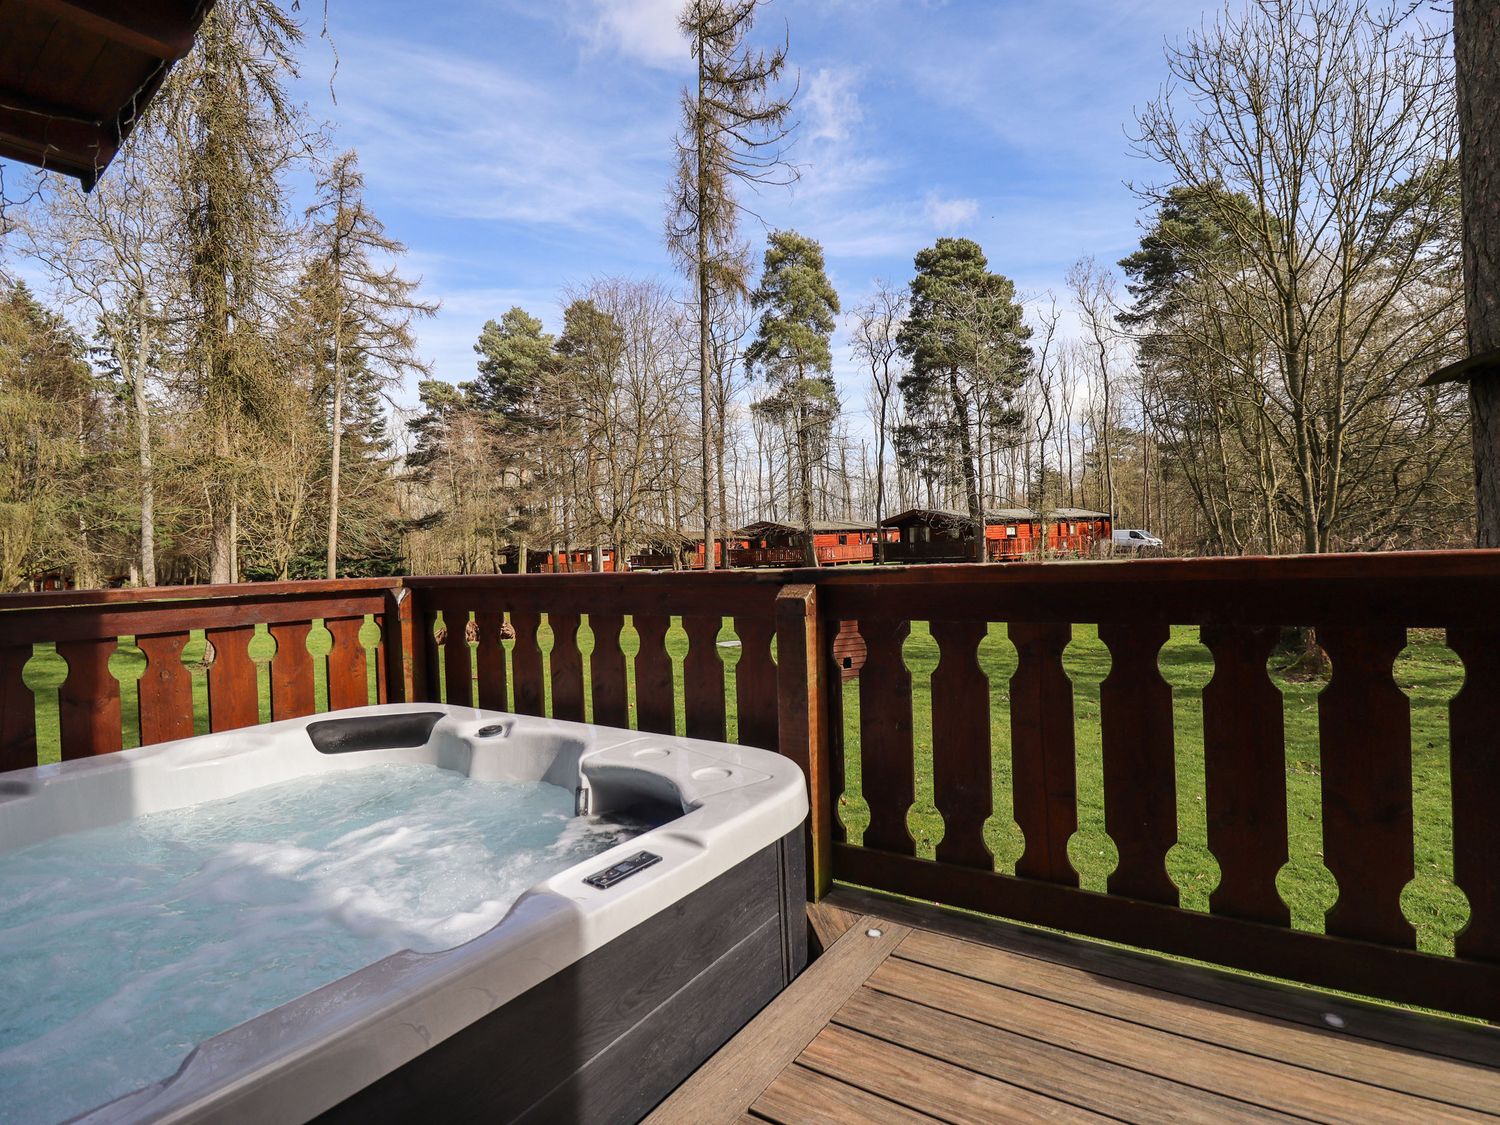 iLodge 73 in Kenwick, Lincolnshire, sleeps eight guests in three bedrooms. Hot tub, private parking.